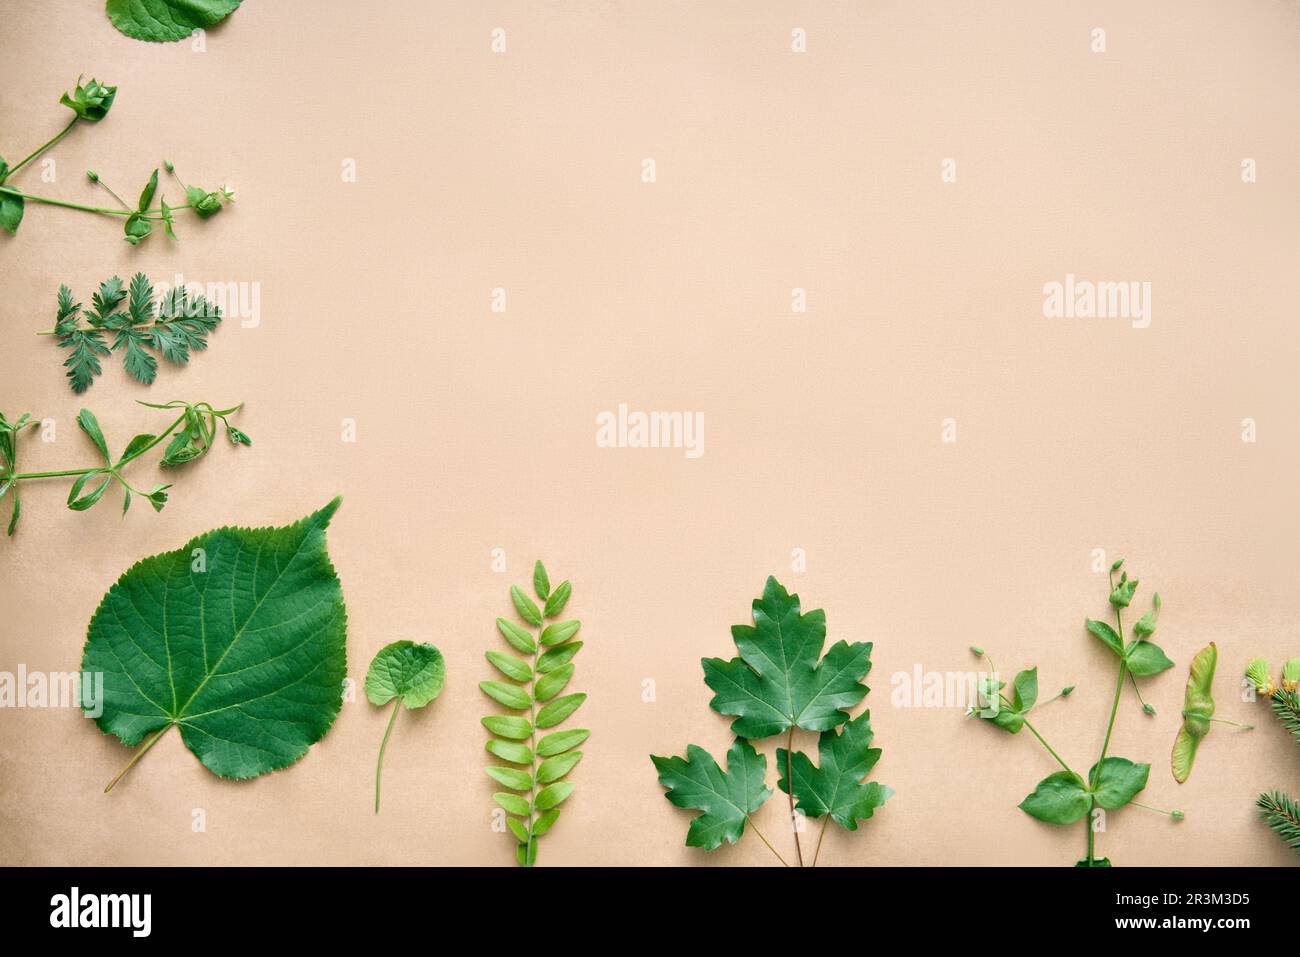 Green leaves border. Frame made of various plants and herbs with copy space for text. Nature concept Stock Photo